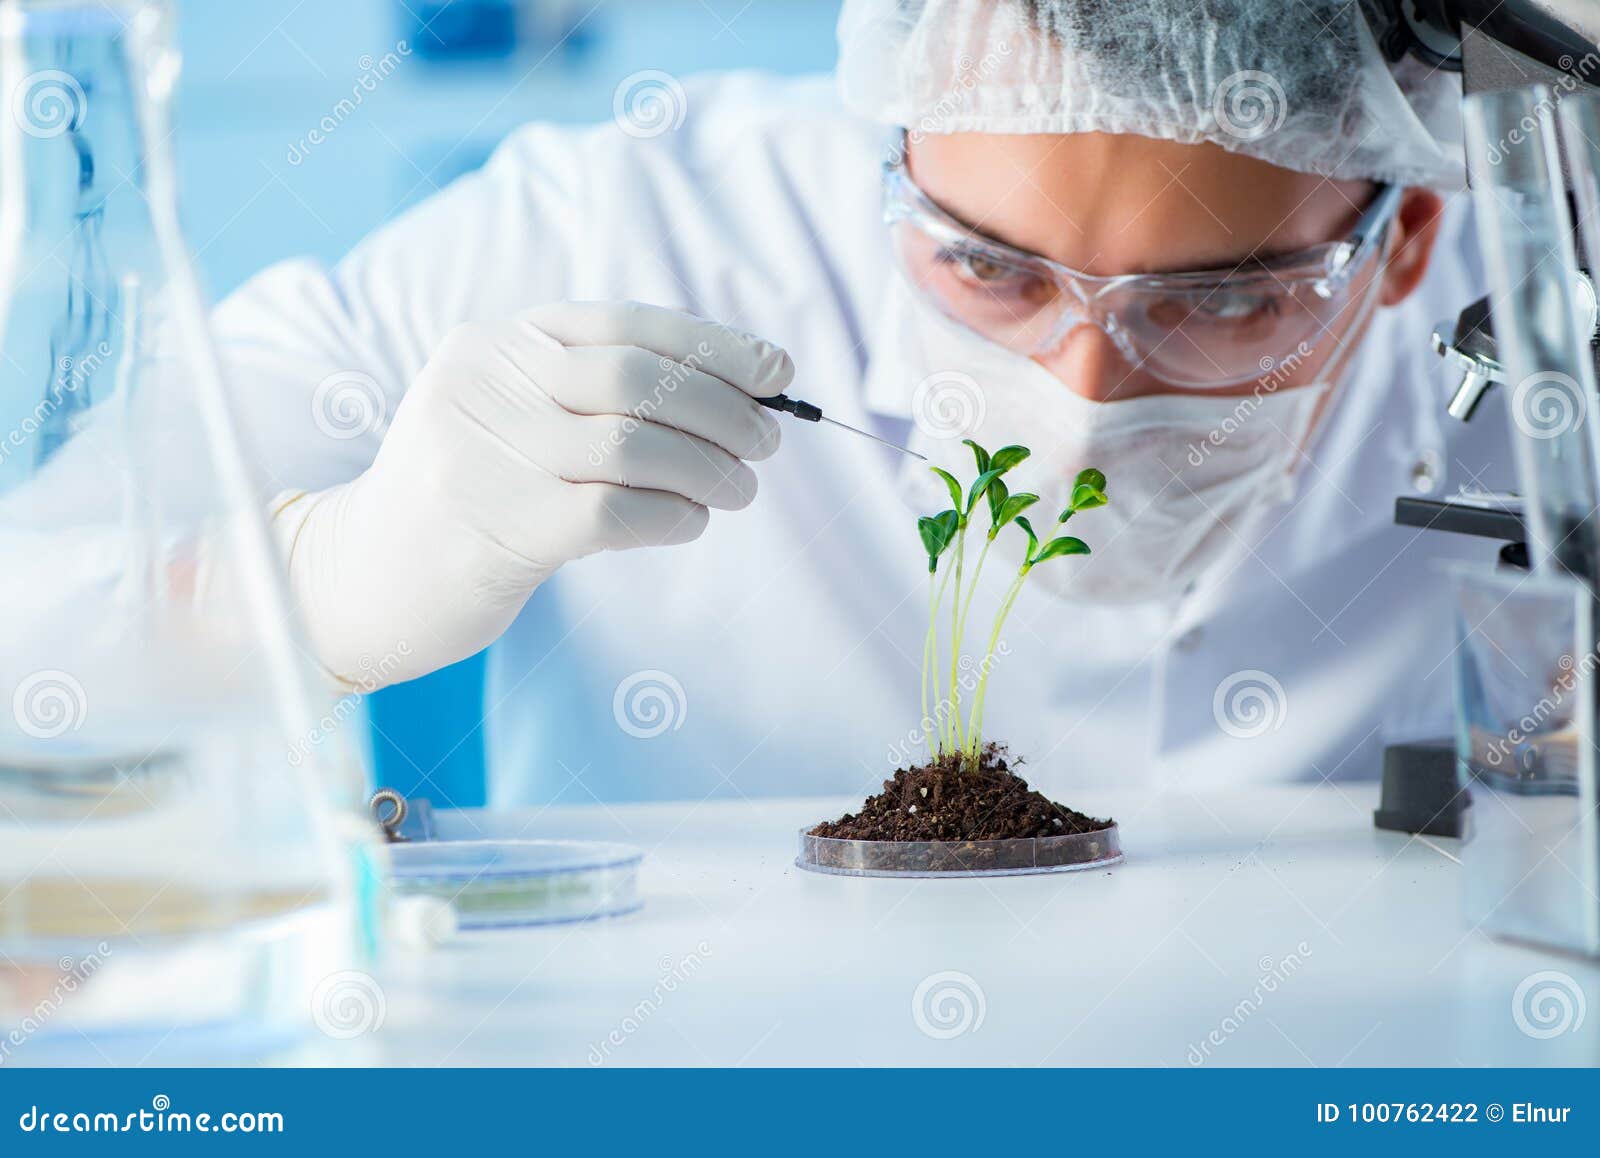 the biotechnology concept with scientist in lab